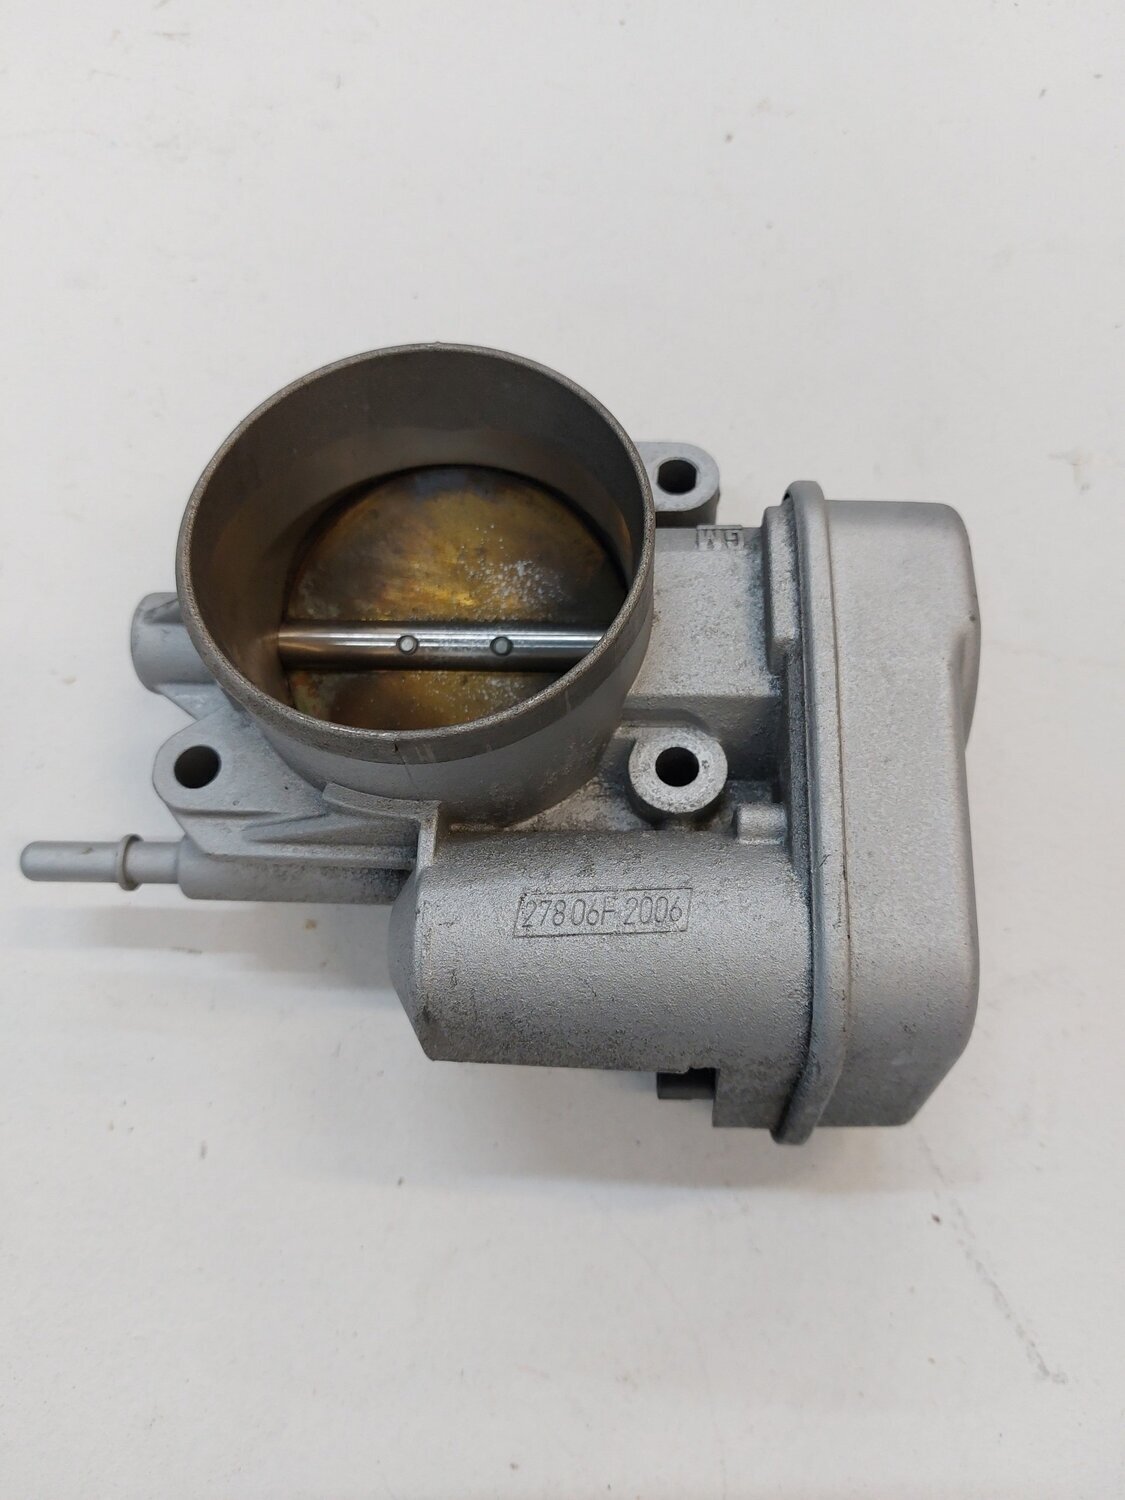 VX220 supercharger LSJ throttle body used